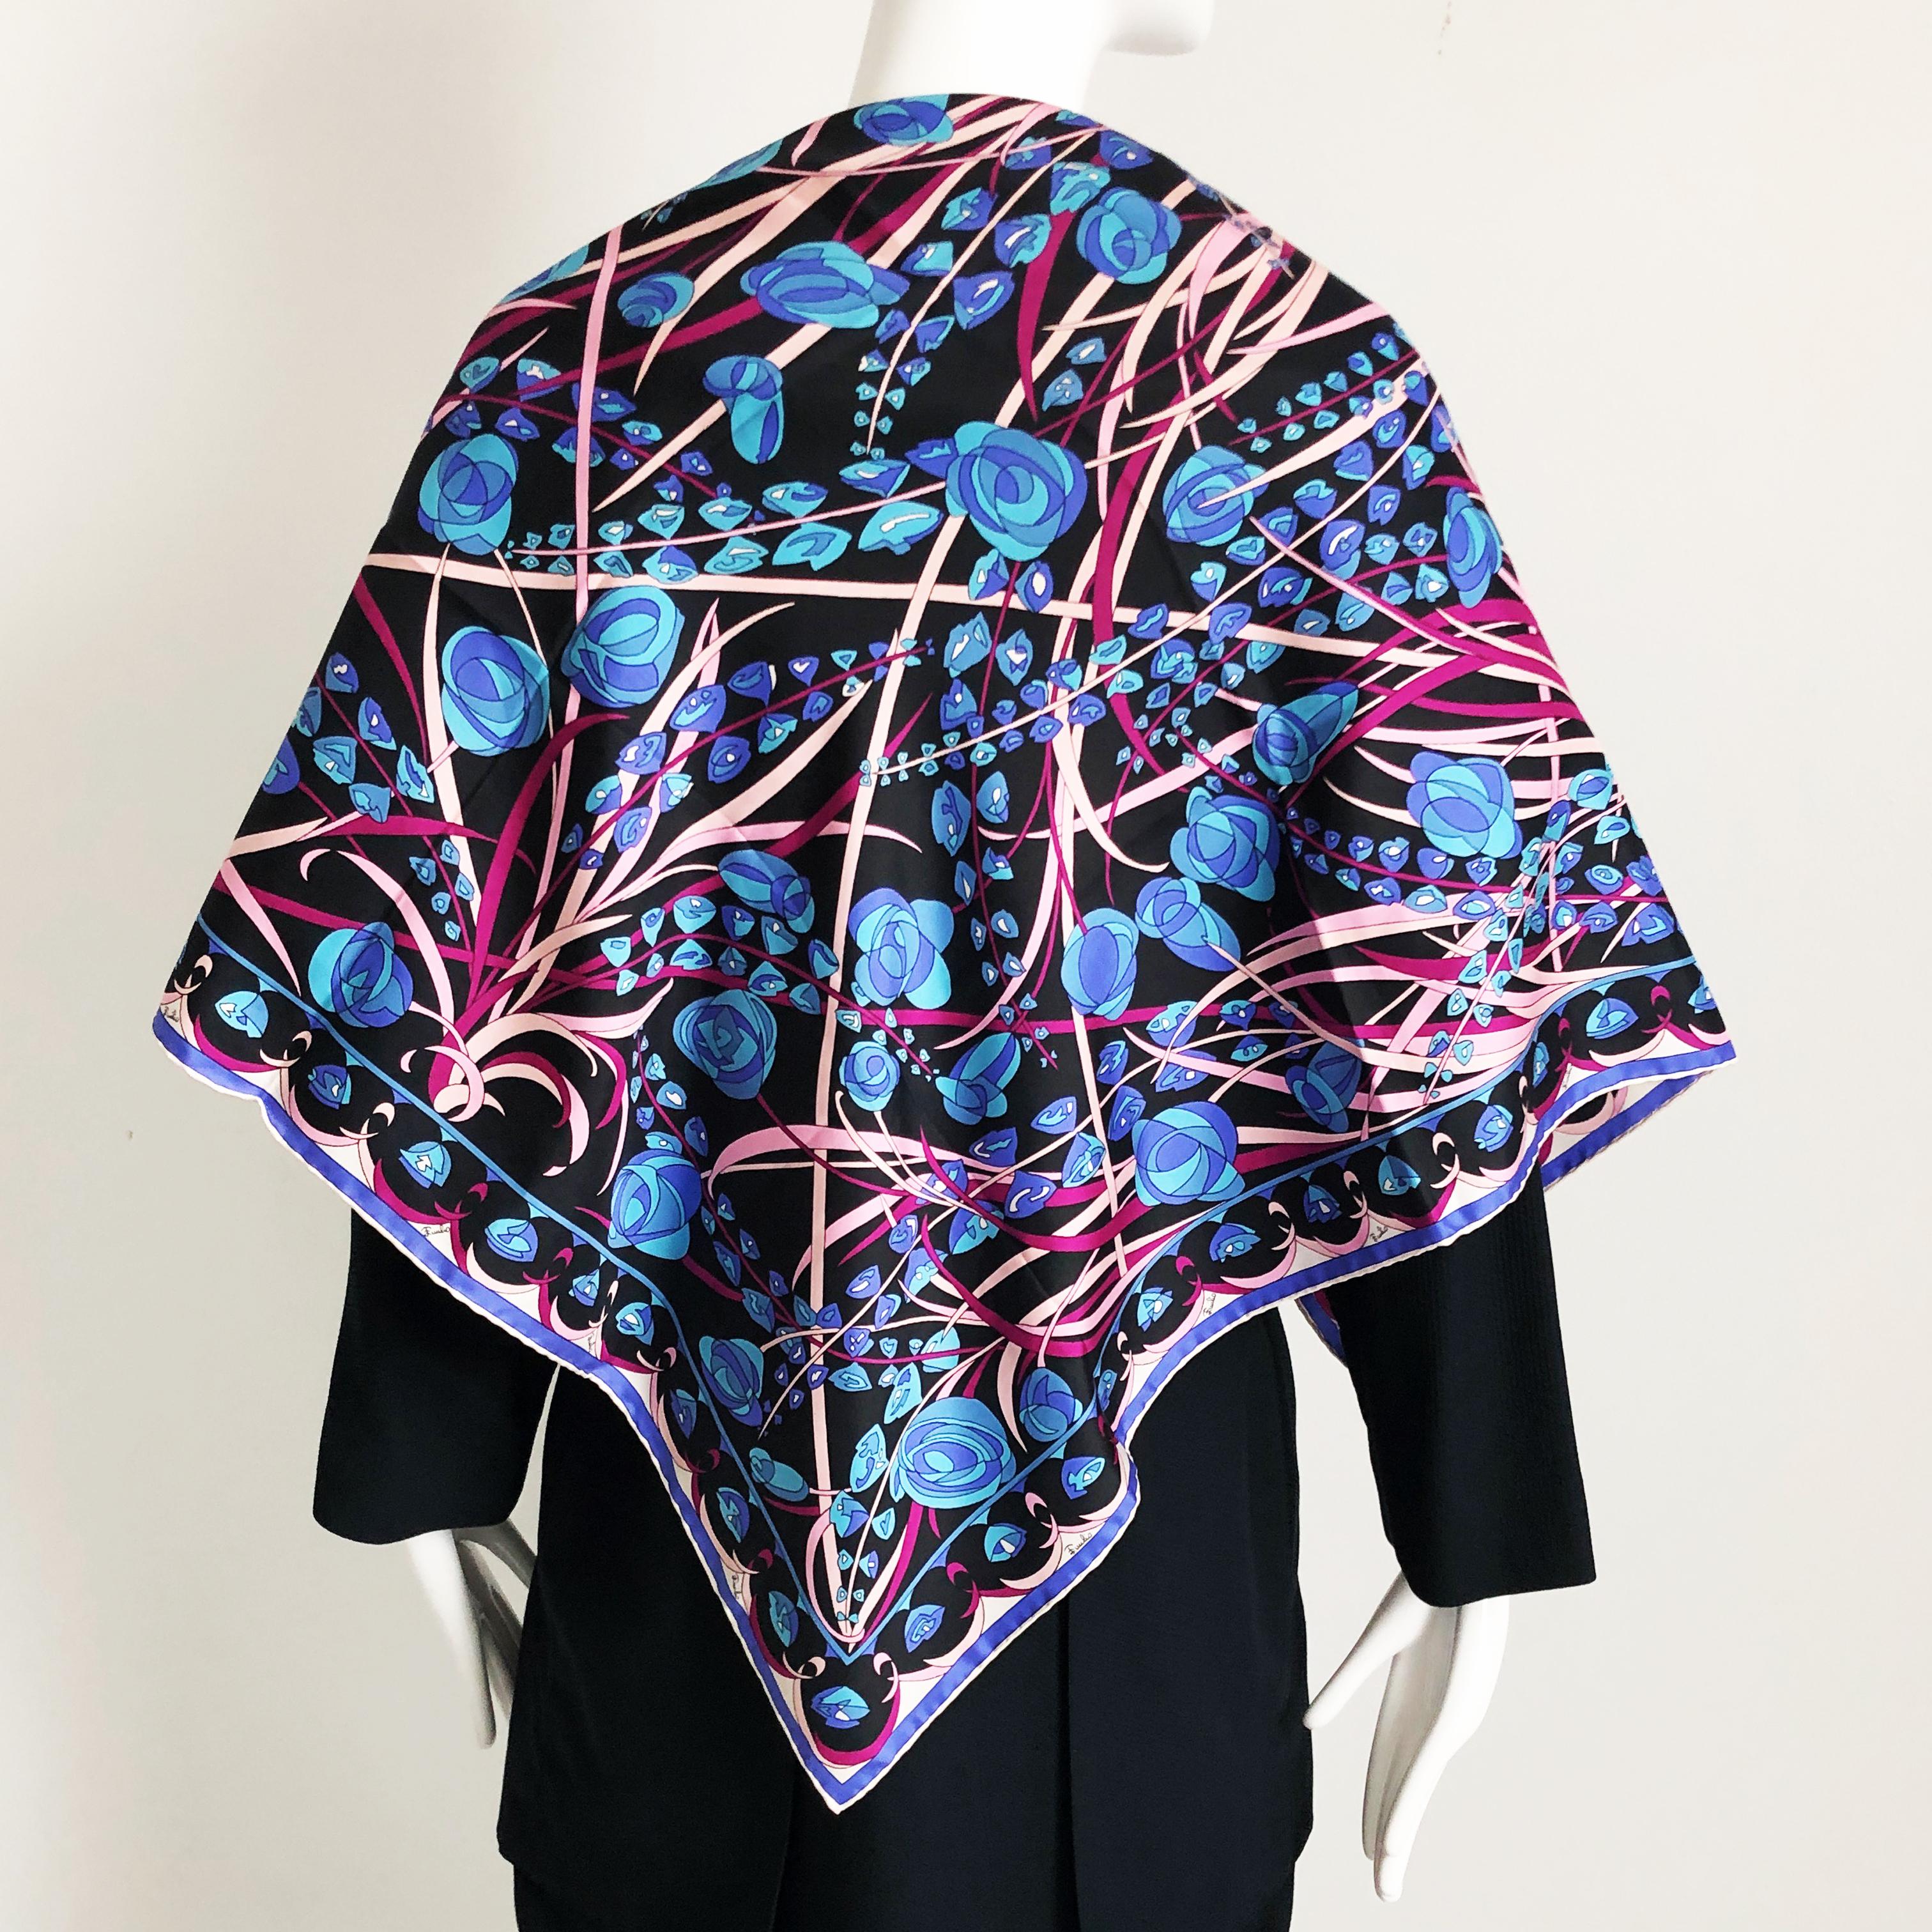 Authentic, preowned, vintage Emilio Pucci silk scarf or shawl, 34in square. Silk/dry clean only/hand rolled hems. Absolutely gorgeous colors on this scarf and the 34in size makes it easy to style in various ways! 

Preowned/vintage with minimal